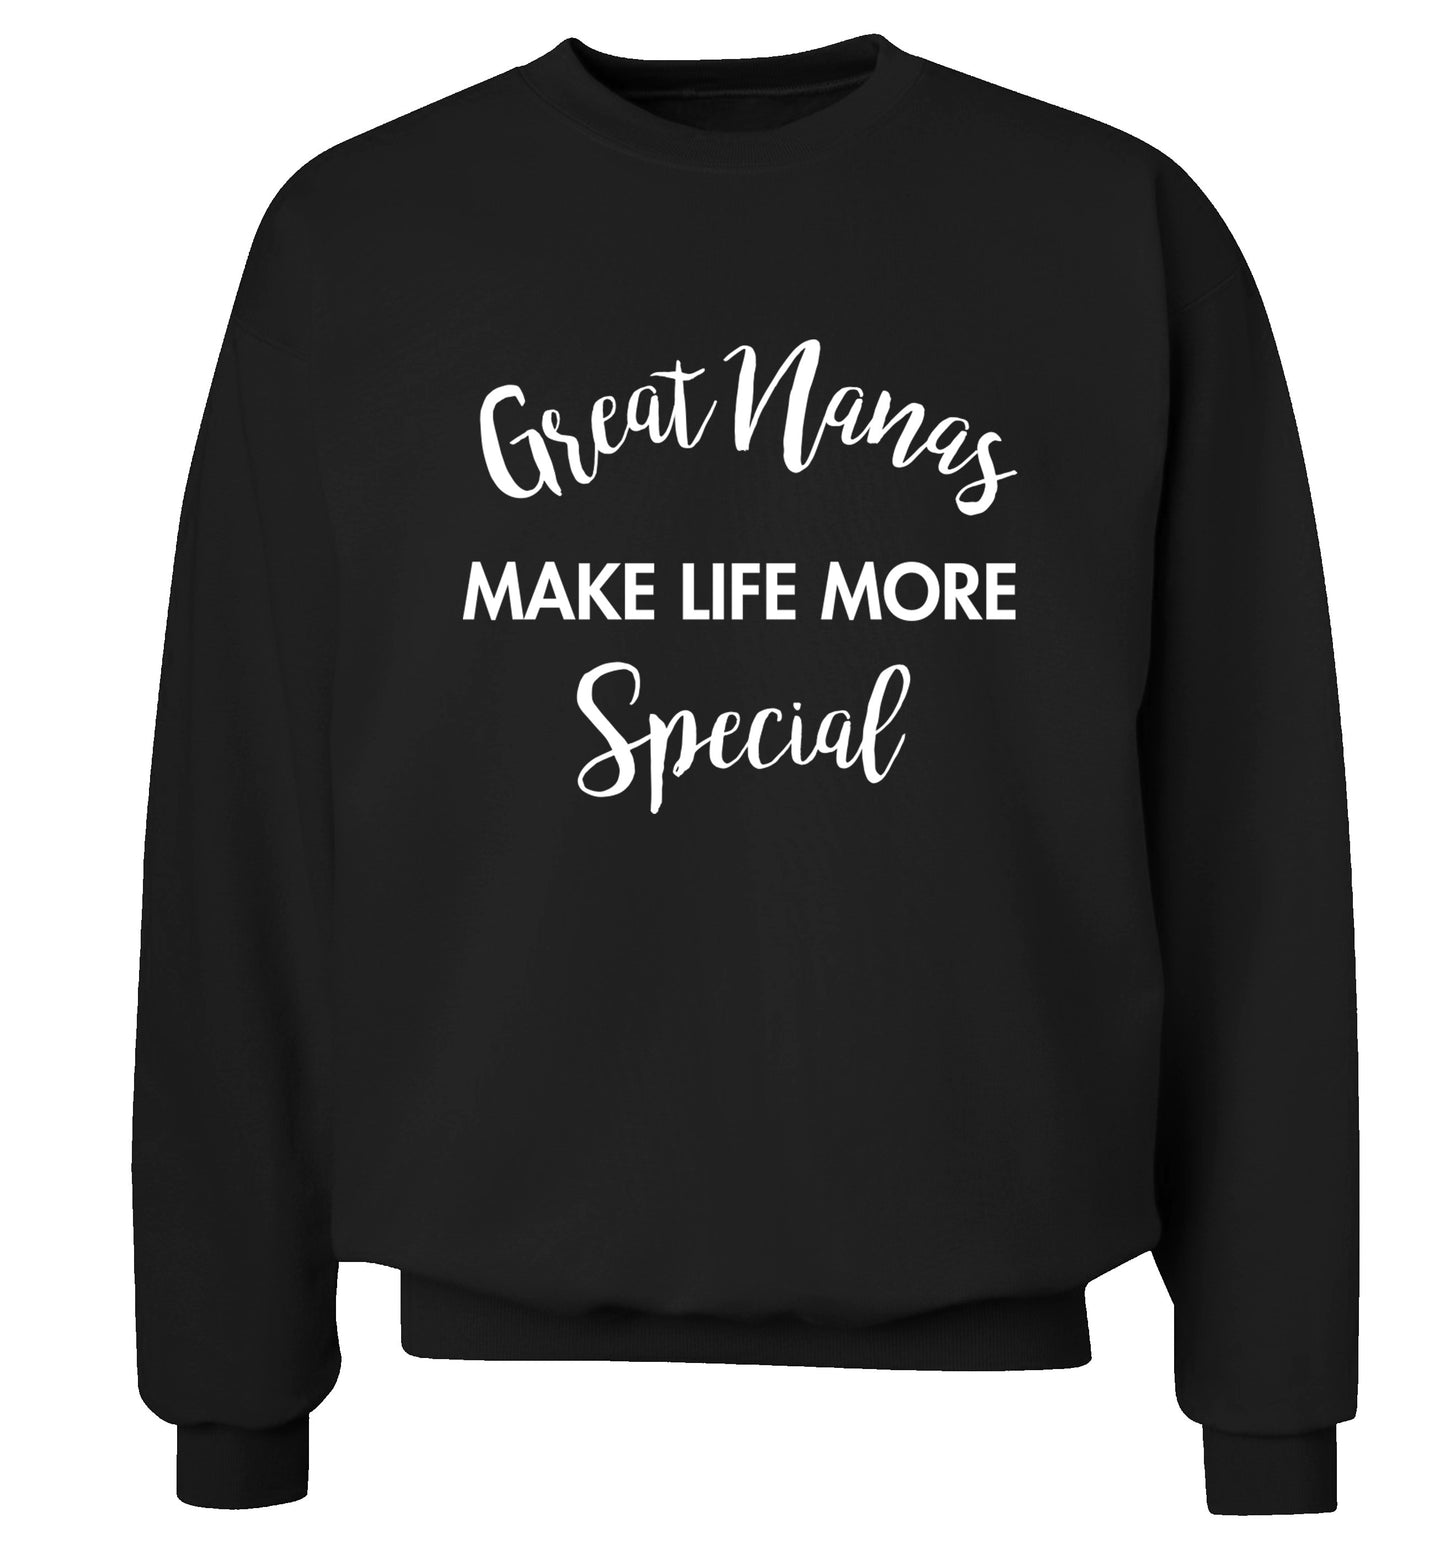 Great nanas make life more special Adult's unisex black Sweater 2XL